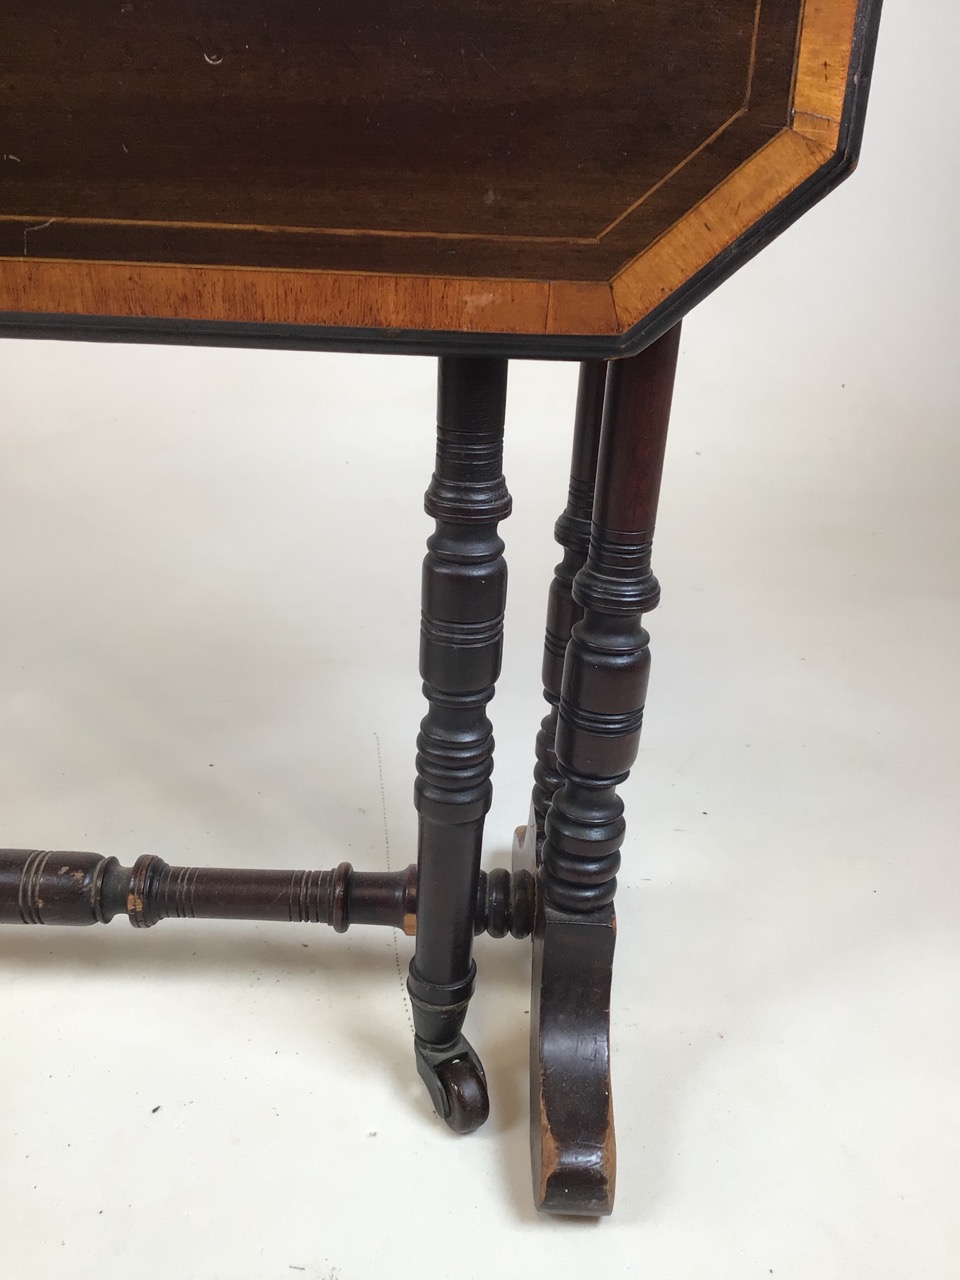 A small Edwardian mahogany inlaid Sutherland table with turned legs and stretcher with ceramic - Image 8 of 9